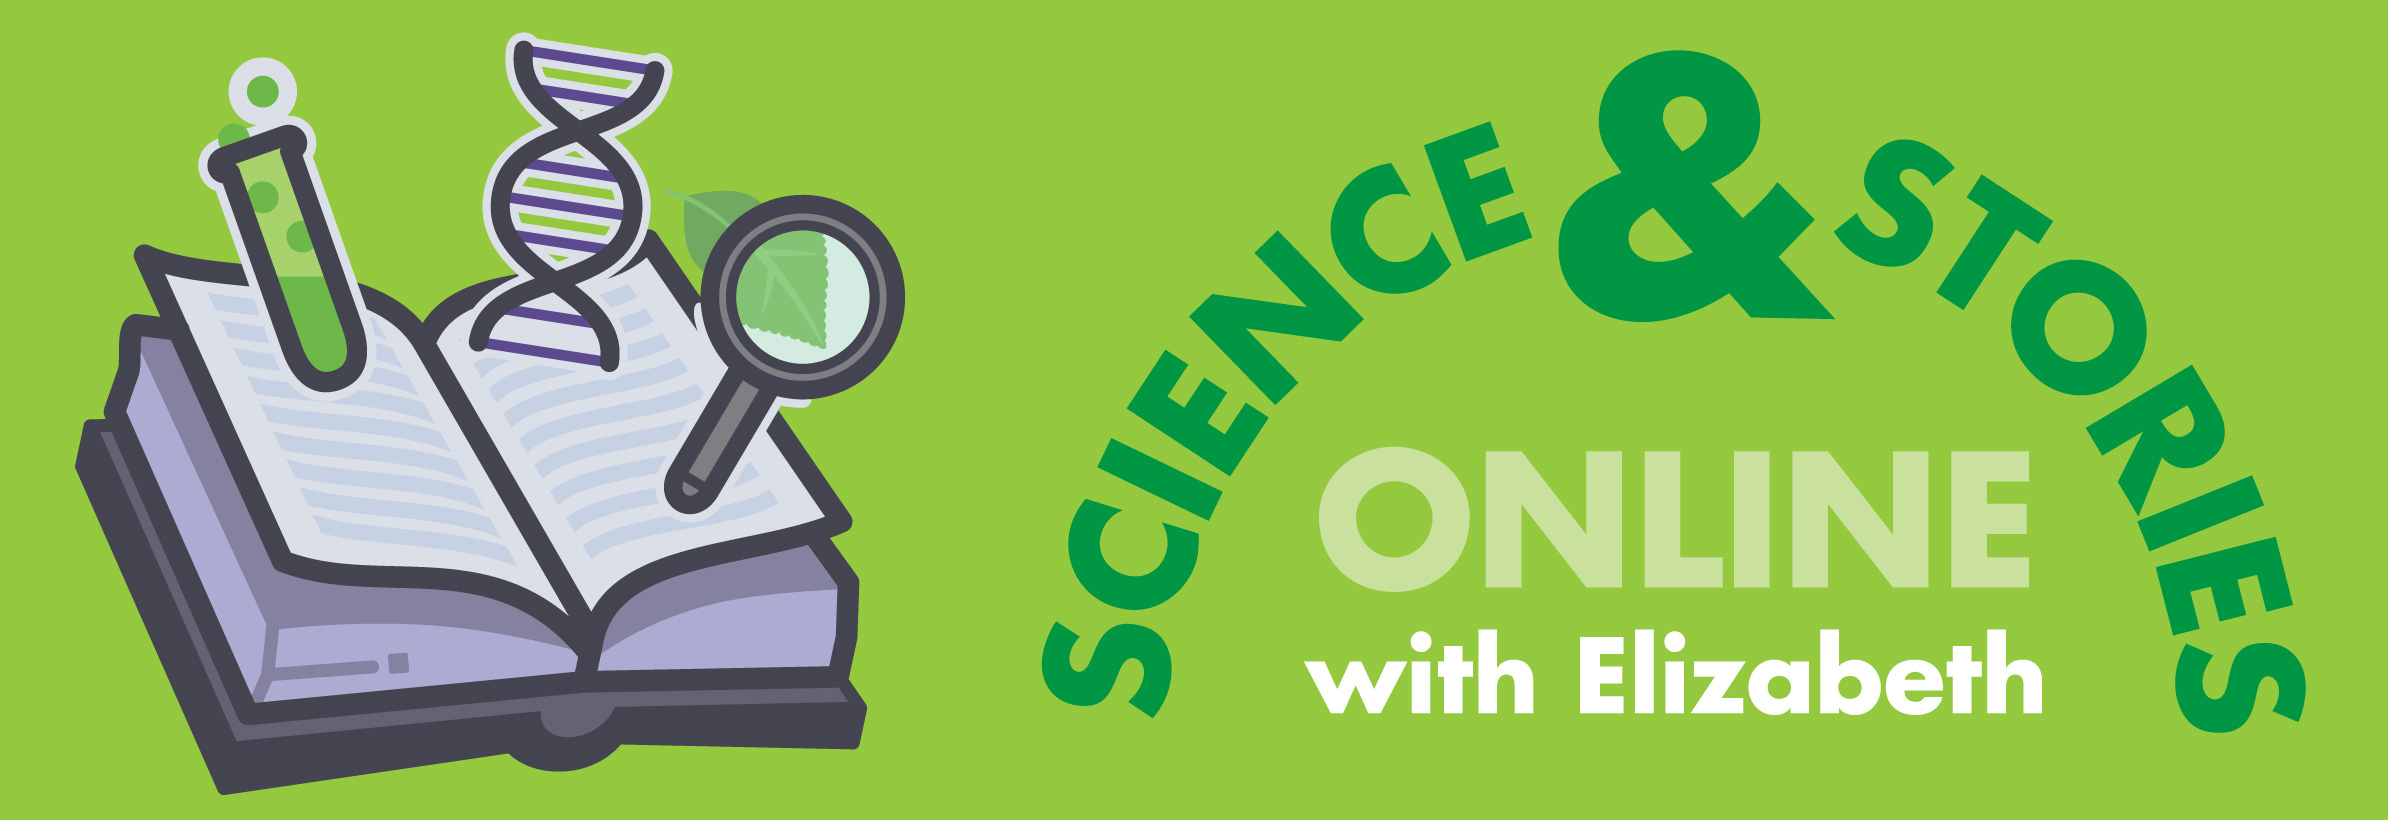 Science and Stories online with Elizabeth